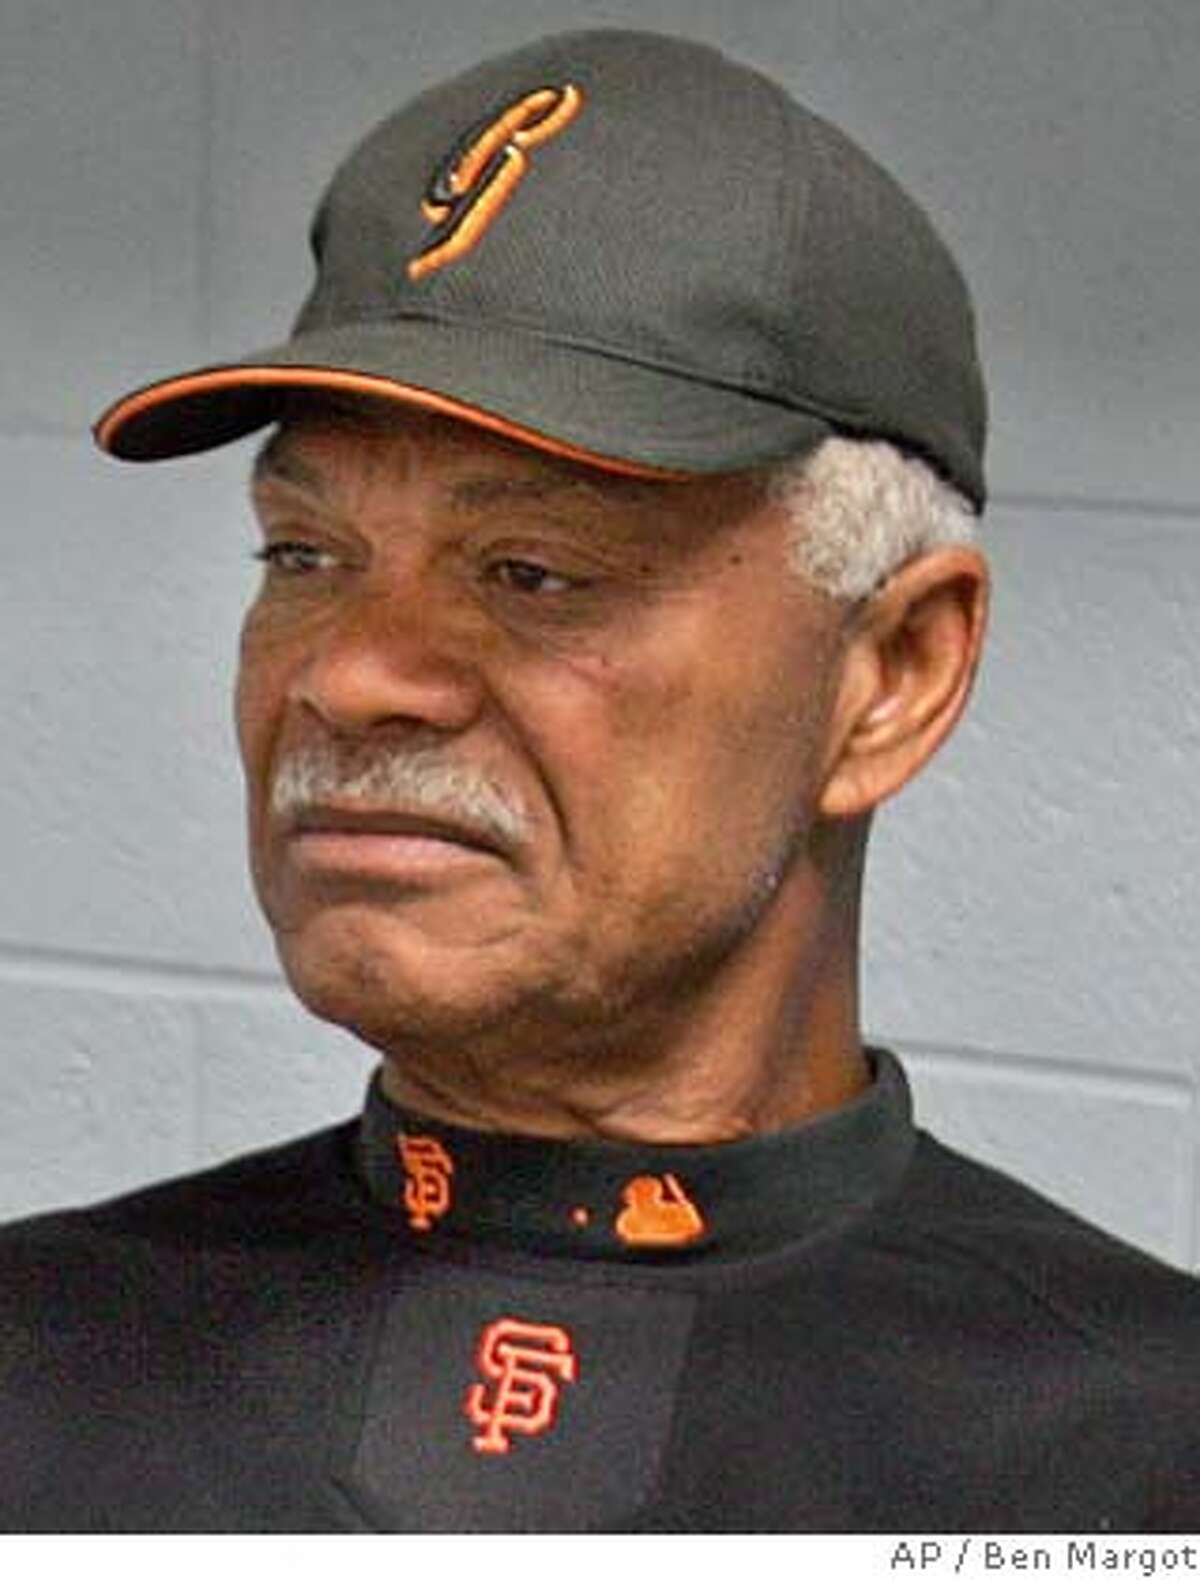 San Francisco Giants' manager Felipe Alou gestures during a news conference in his Scottsdale Stadium office Thursday, March 17, 2005, in Scottsdale, Ariz. The Giants announced that their star left fielder, Barry Bonds, underwent a second operation on his right knee this morning. (AP Photo/Ben Margot) Ran on: 03-31-2005